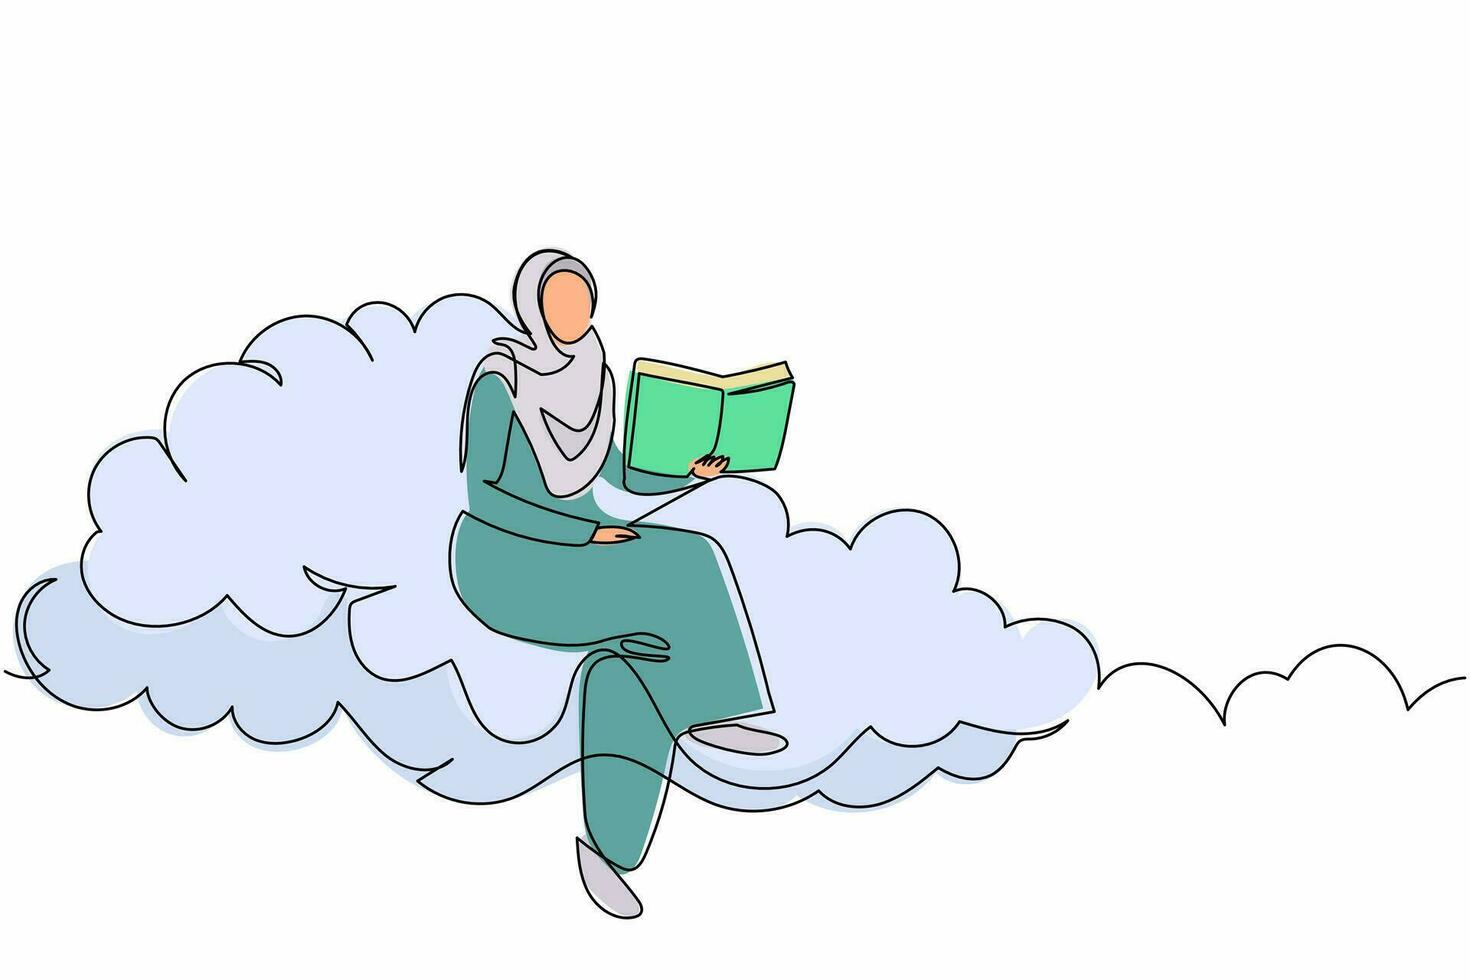 Single one line drawing smart Arab businesswoman sitting on cloud and reading book. Studying higher education for worker. Pursuit career growth. Continuous line draw design graphic vector illustration